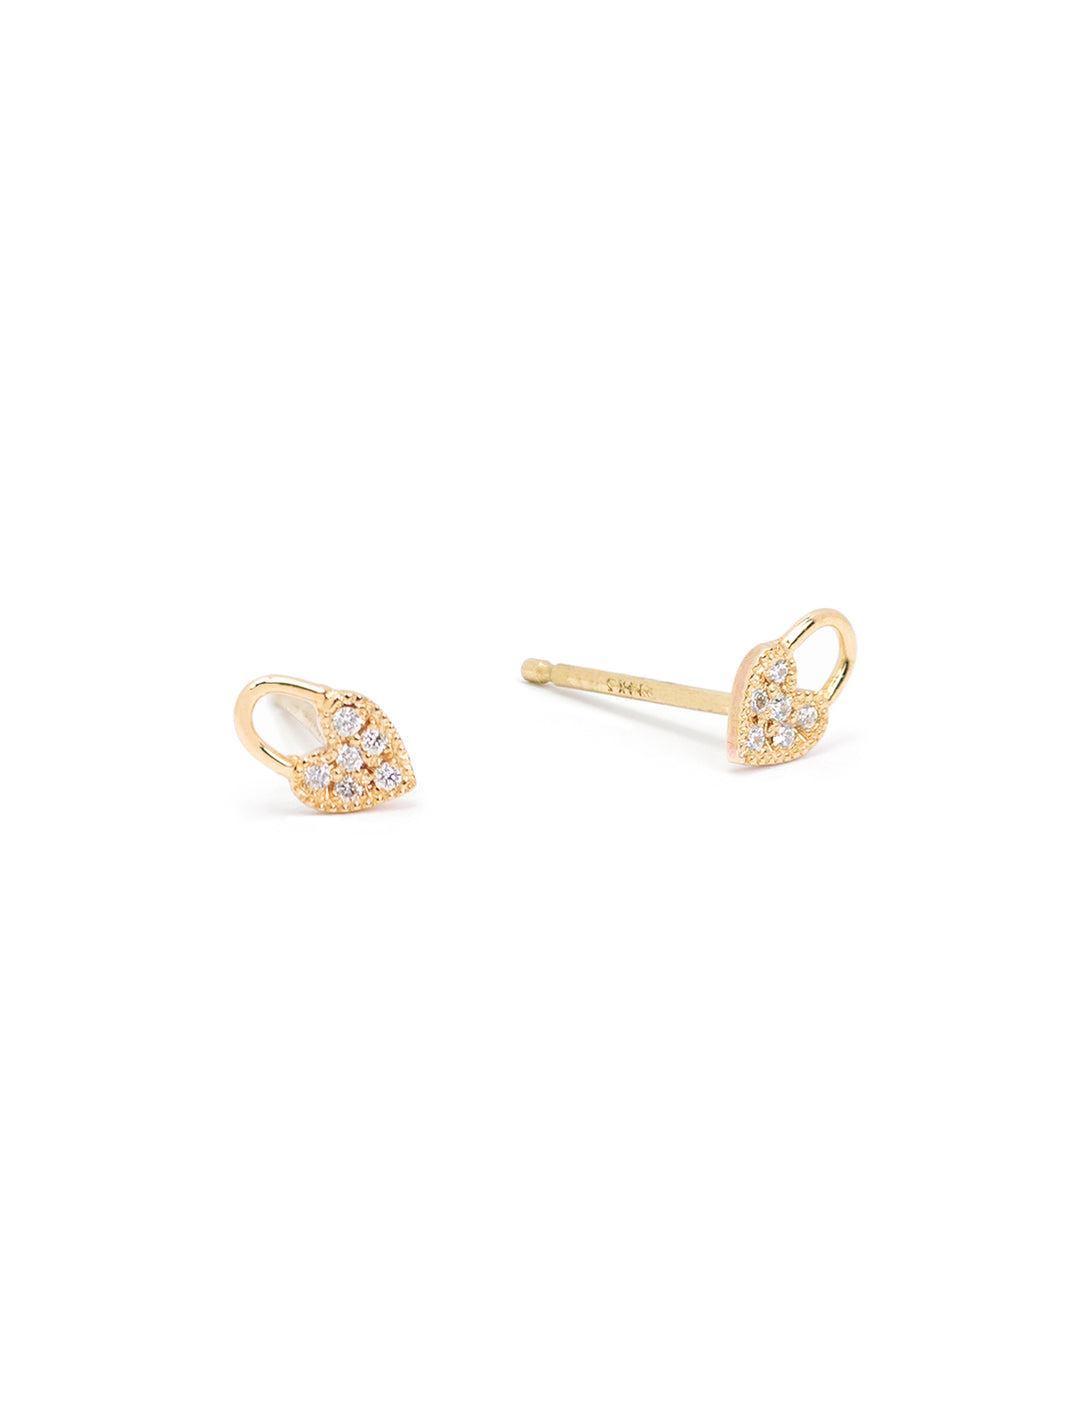 Front view of Zoe Chicco's 14k itty bitty pave heart lock studs.